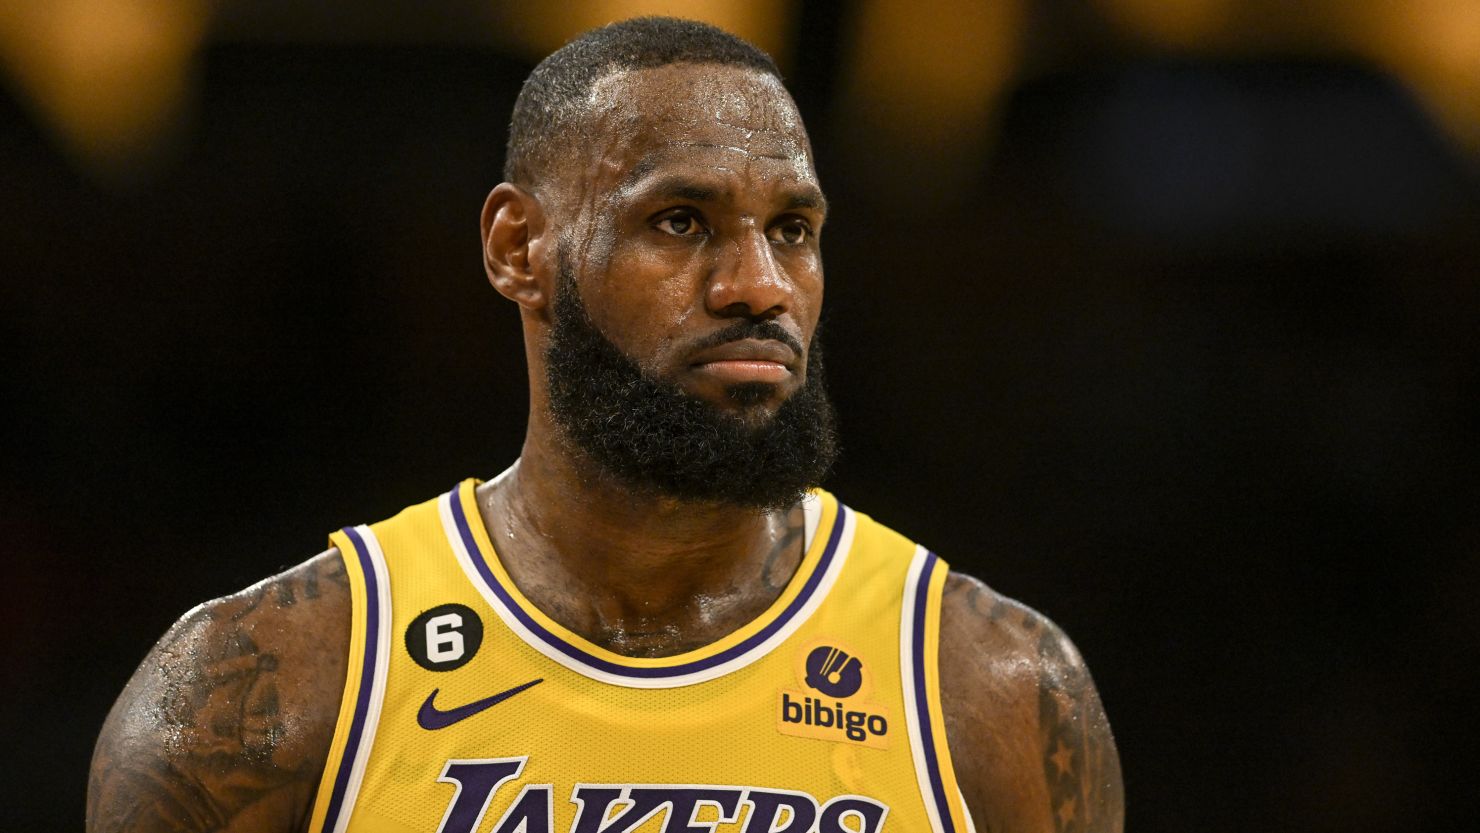 LeBron James is considering his basketball future after the Lakers were swept by the Nuggets.